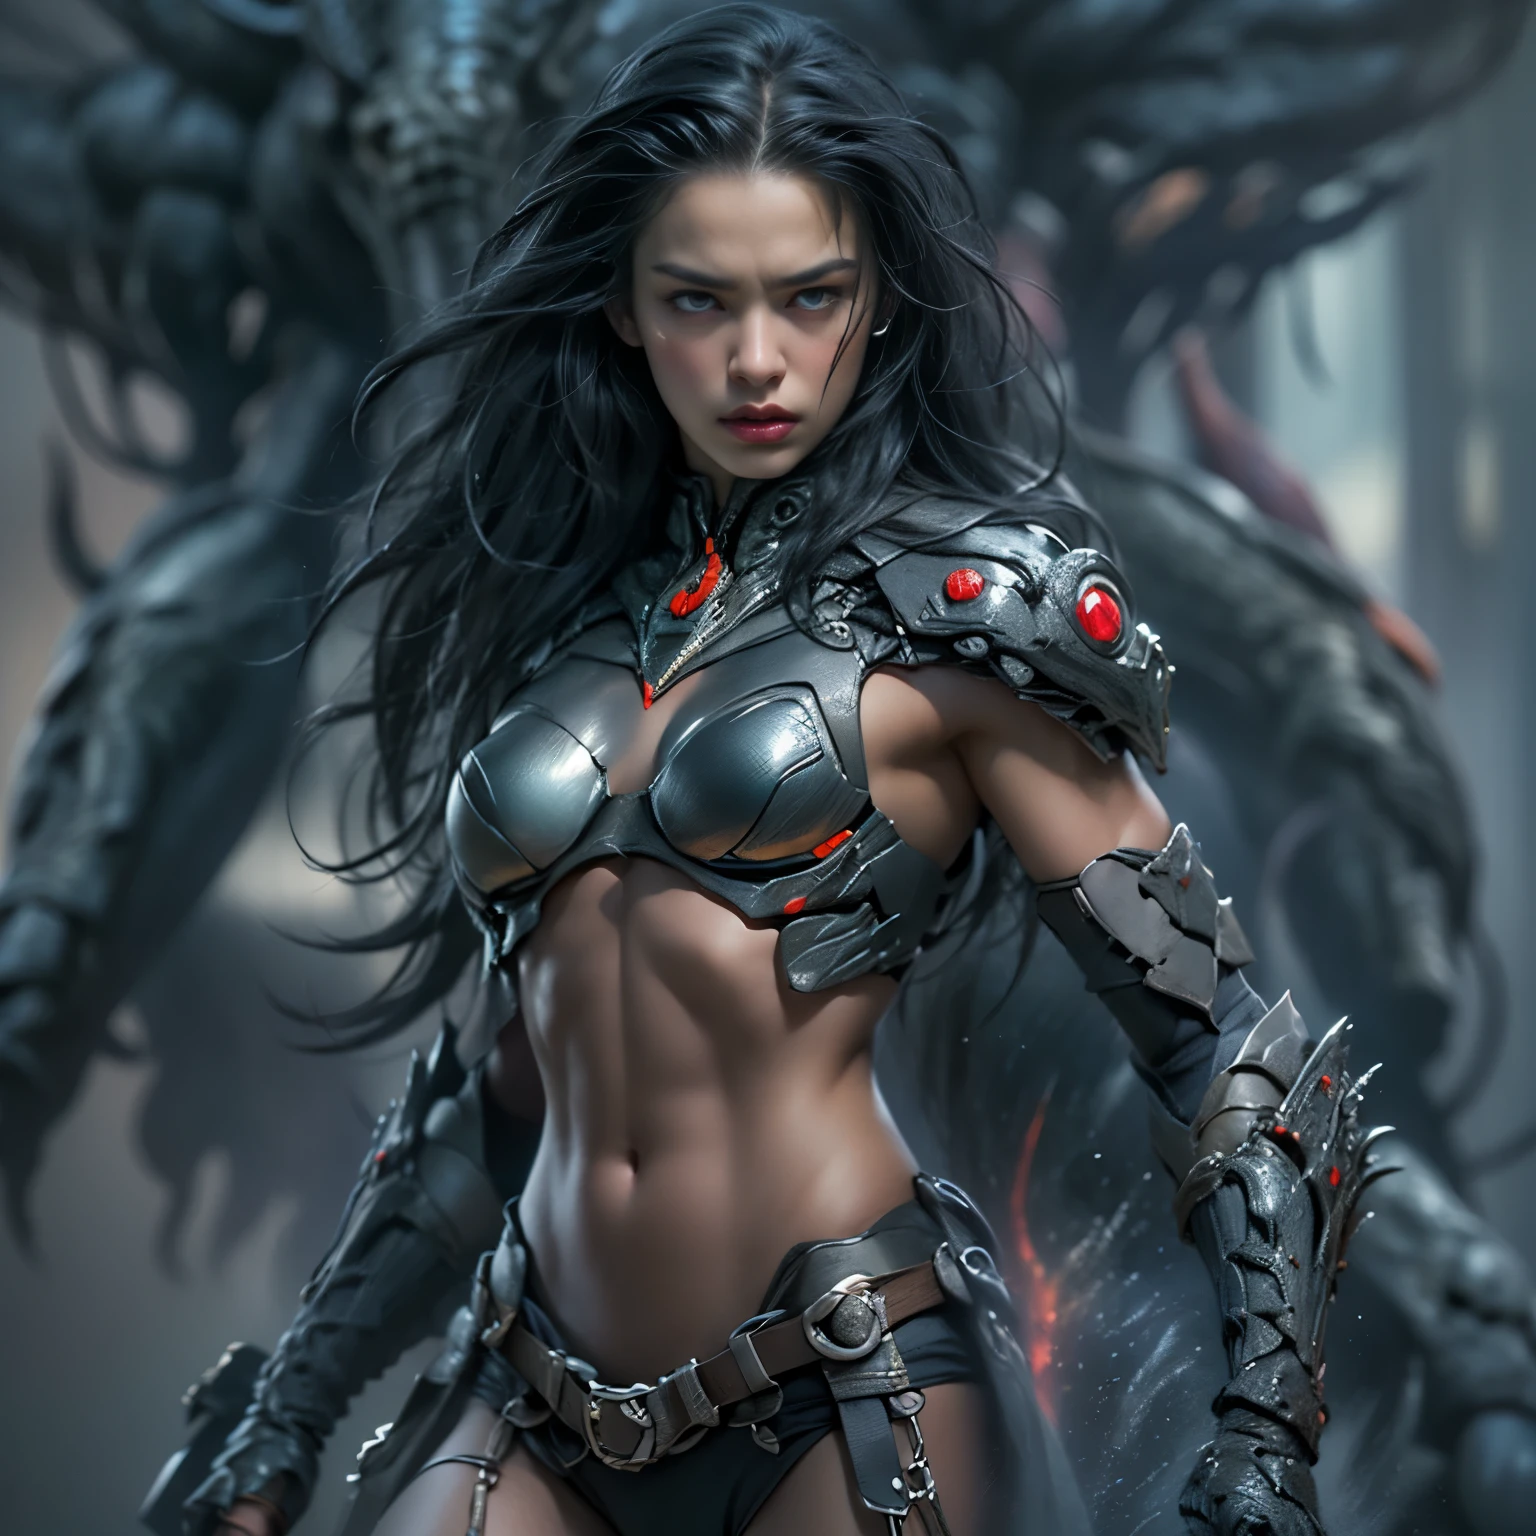 1 female alien, The predator, (extremely beautiful:1.2), (intense gaze:1.4), (predator:1.1), long dark claws, (NSFW:1), nipples, thick eyebrows, (She has shining sapphire blue eyes:1.2), the most beautiful face in the universe, jet black hair, symmetrical beautiful eyes, hyper detailed eyes,
A woman predator with an extremely beautiful face, her intense gaze fixed on her prey, a primal force that could not be denied.

(beautiful lean body:1.5), (muscular build:1.2), (prowling:1.3), (sleek movements:1.4)

Her beautiful body, muscular and toned, moved with sleek grace as she prowled, ready to strike at a moment's notice. The predator within her was always on,                                                                          
                                                                                                                                                               
 cinematic drawing of characters, ultra high quality model, cinematic quality, detail up, (Intricate details:1.2), High resolution, High Definition, drawing faithfully, Official art, Unity 8K wall , 8K Portrait, Best Quality, Very High resolution, ultra detailed artistic photography,